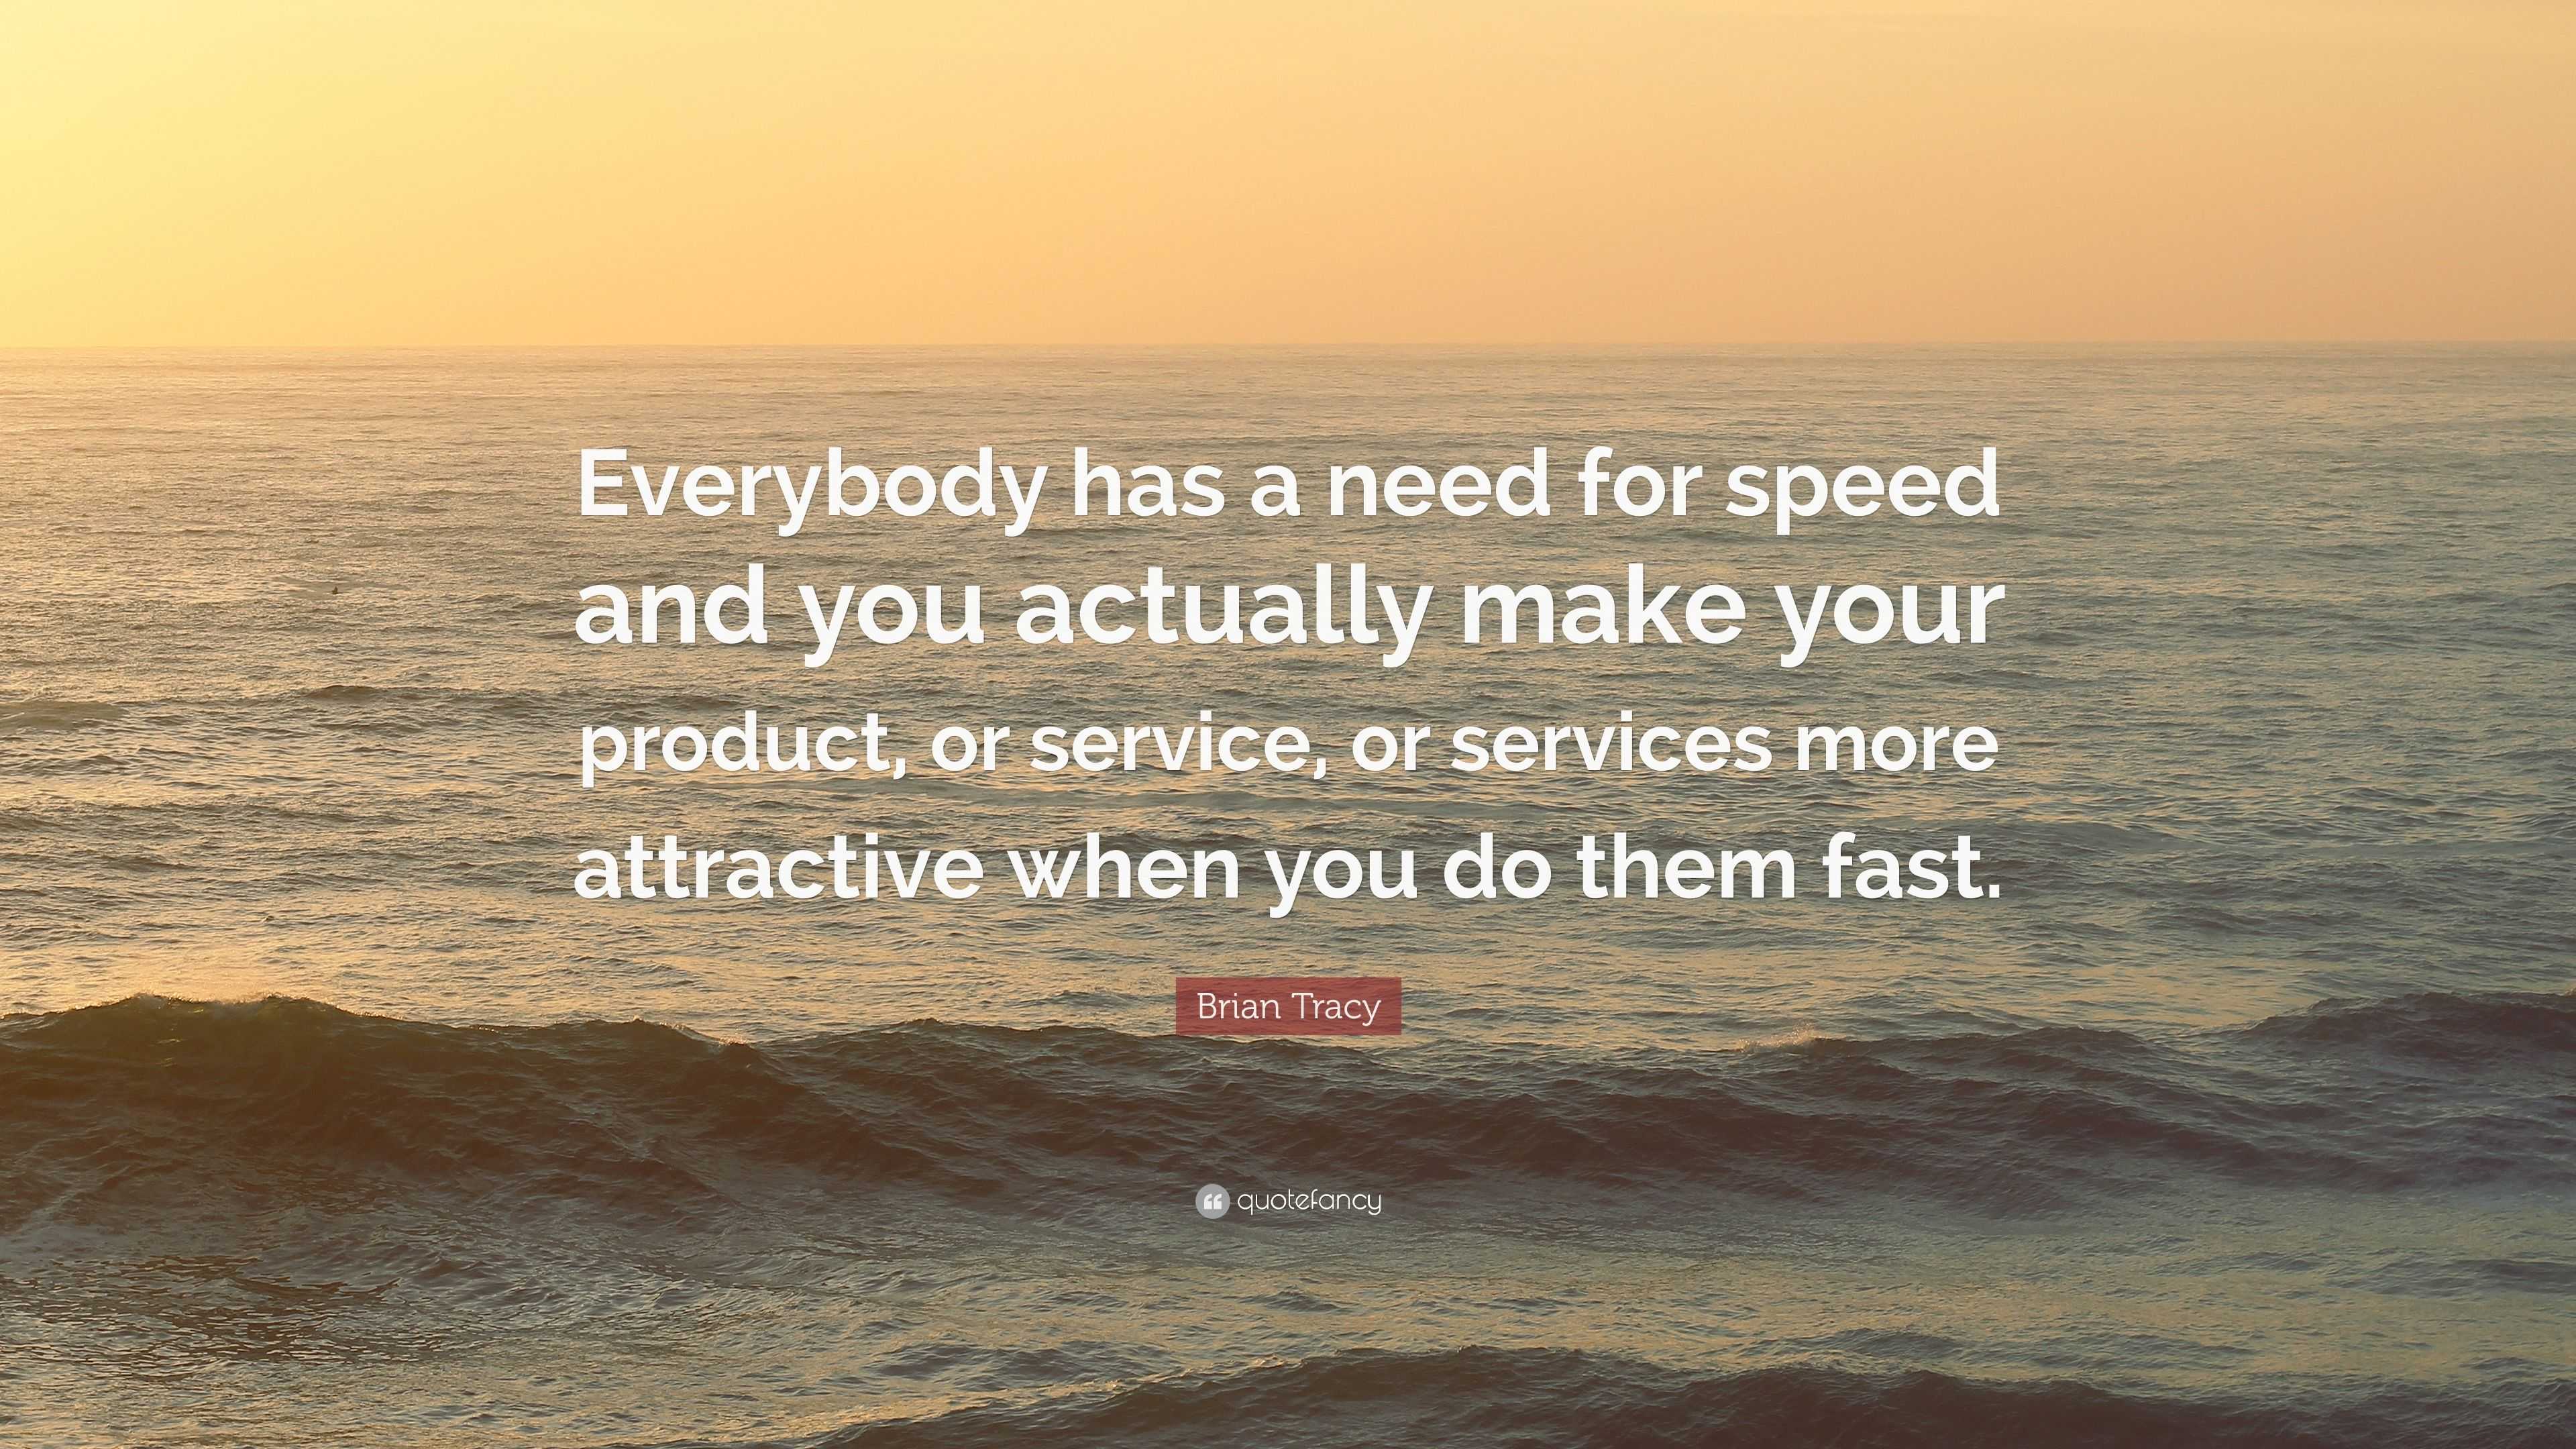 Brian Tracy Quote: “Everybody has a need for speed and you actually make  your product, or service, or services more attractive when you do t”